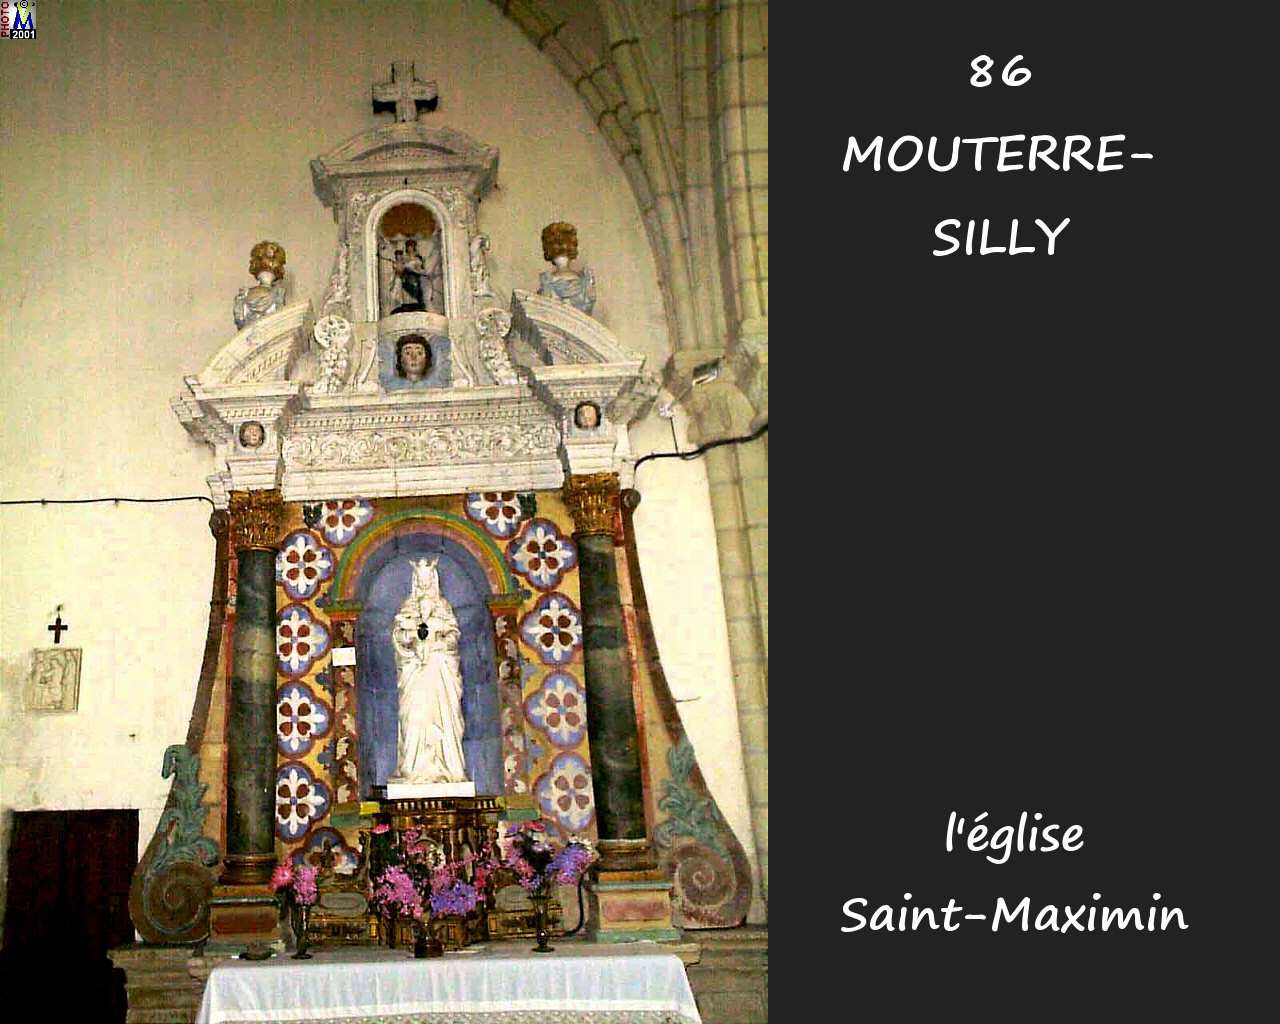 86MOUTERRE-SILLY_eglise_200.jpg